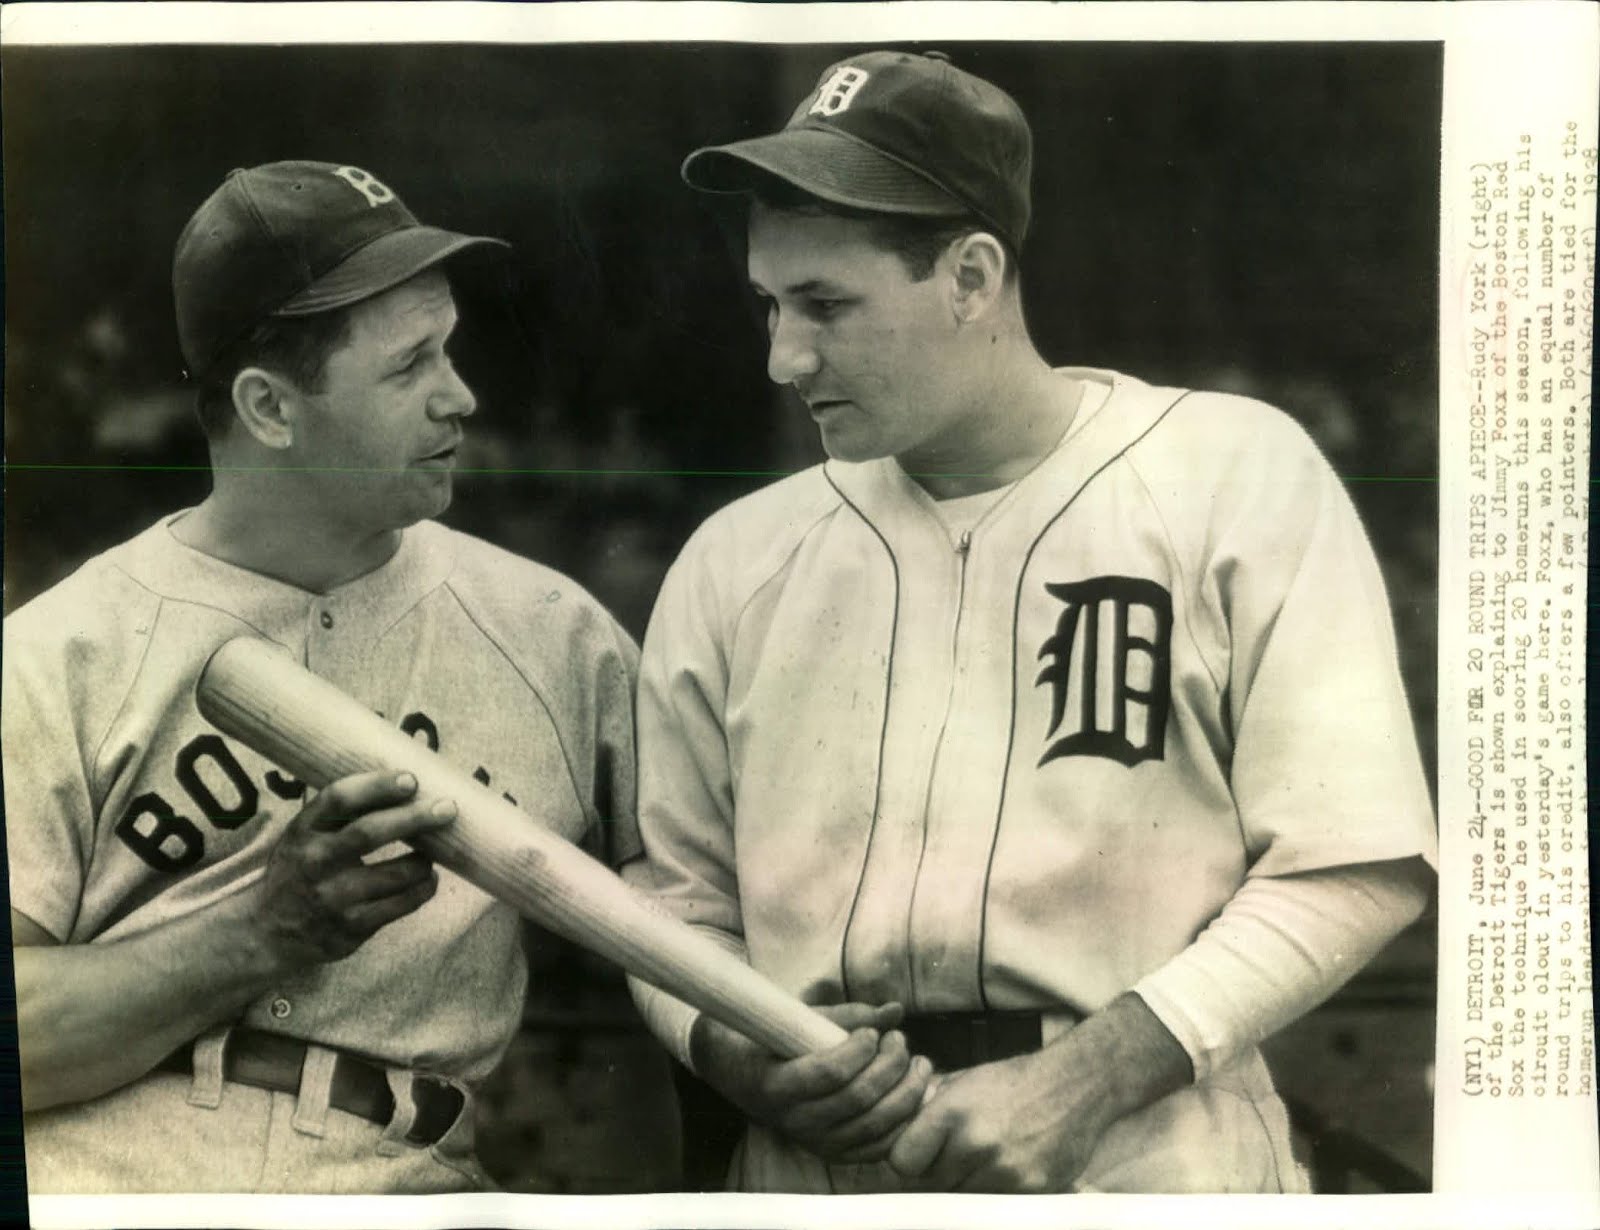 Jimmie Foxx and Rudy York